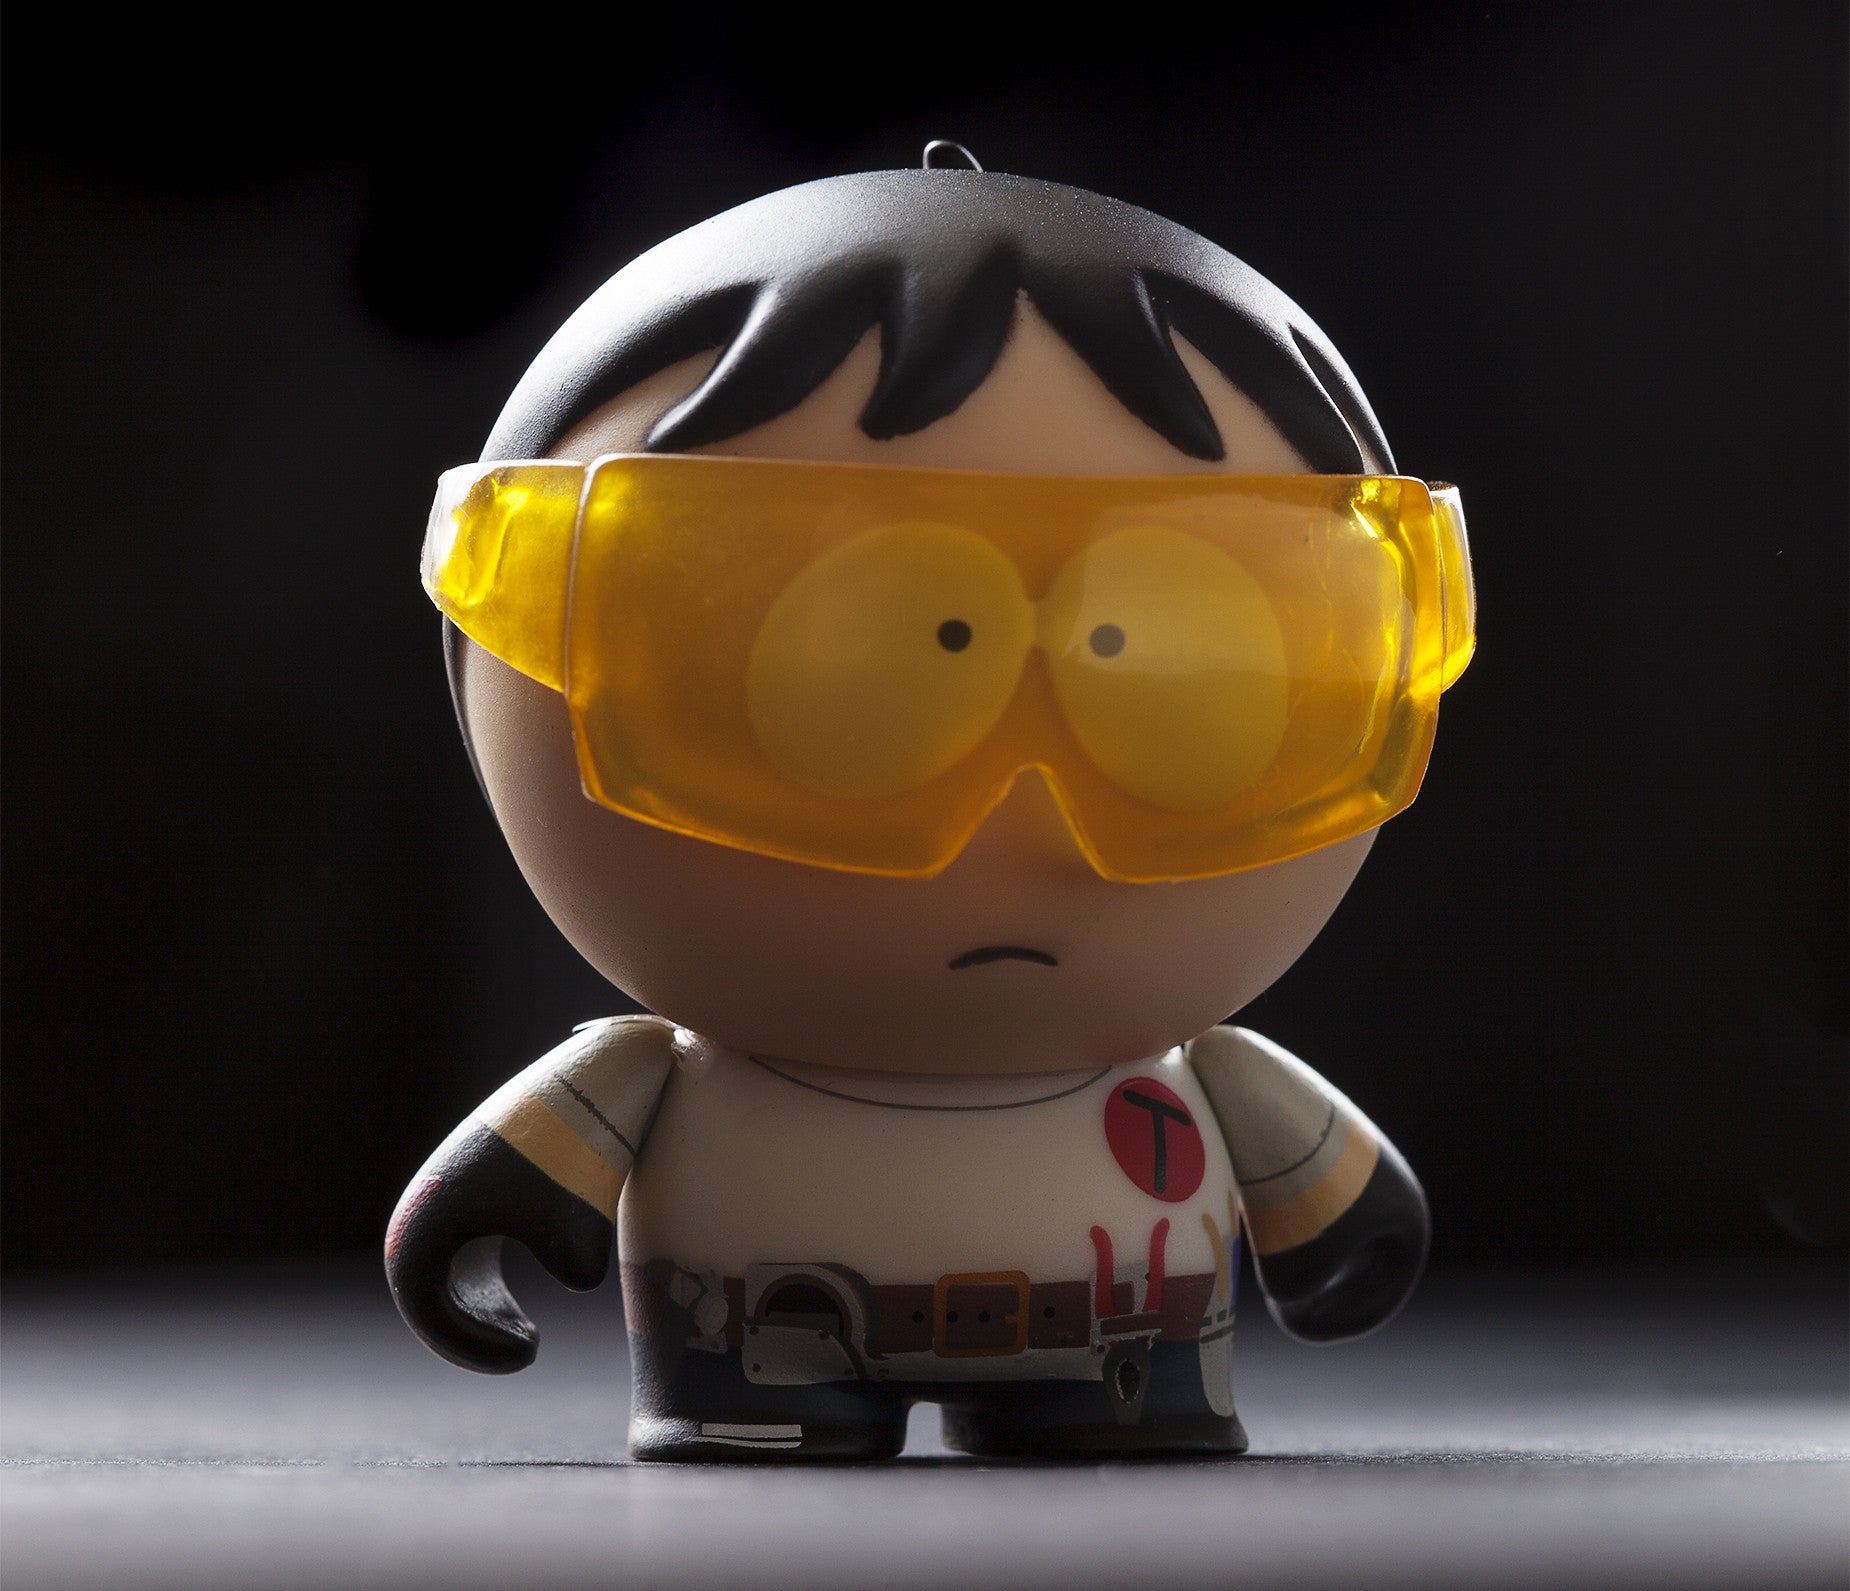 South Park The Fractured But Whole Mini Series Blind Box - Mindzai  - 12